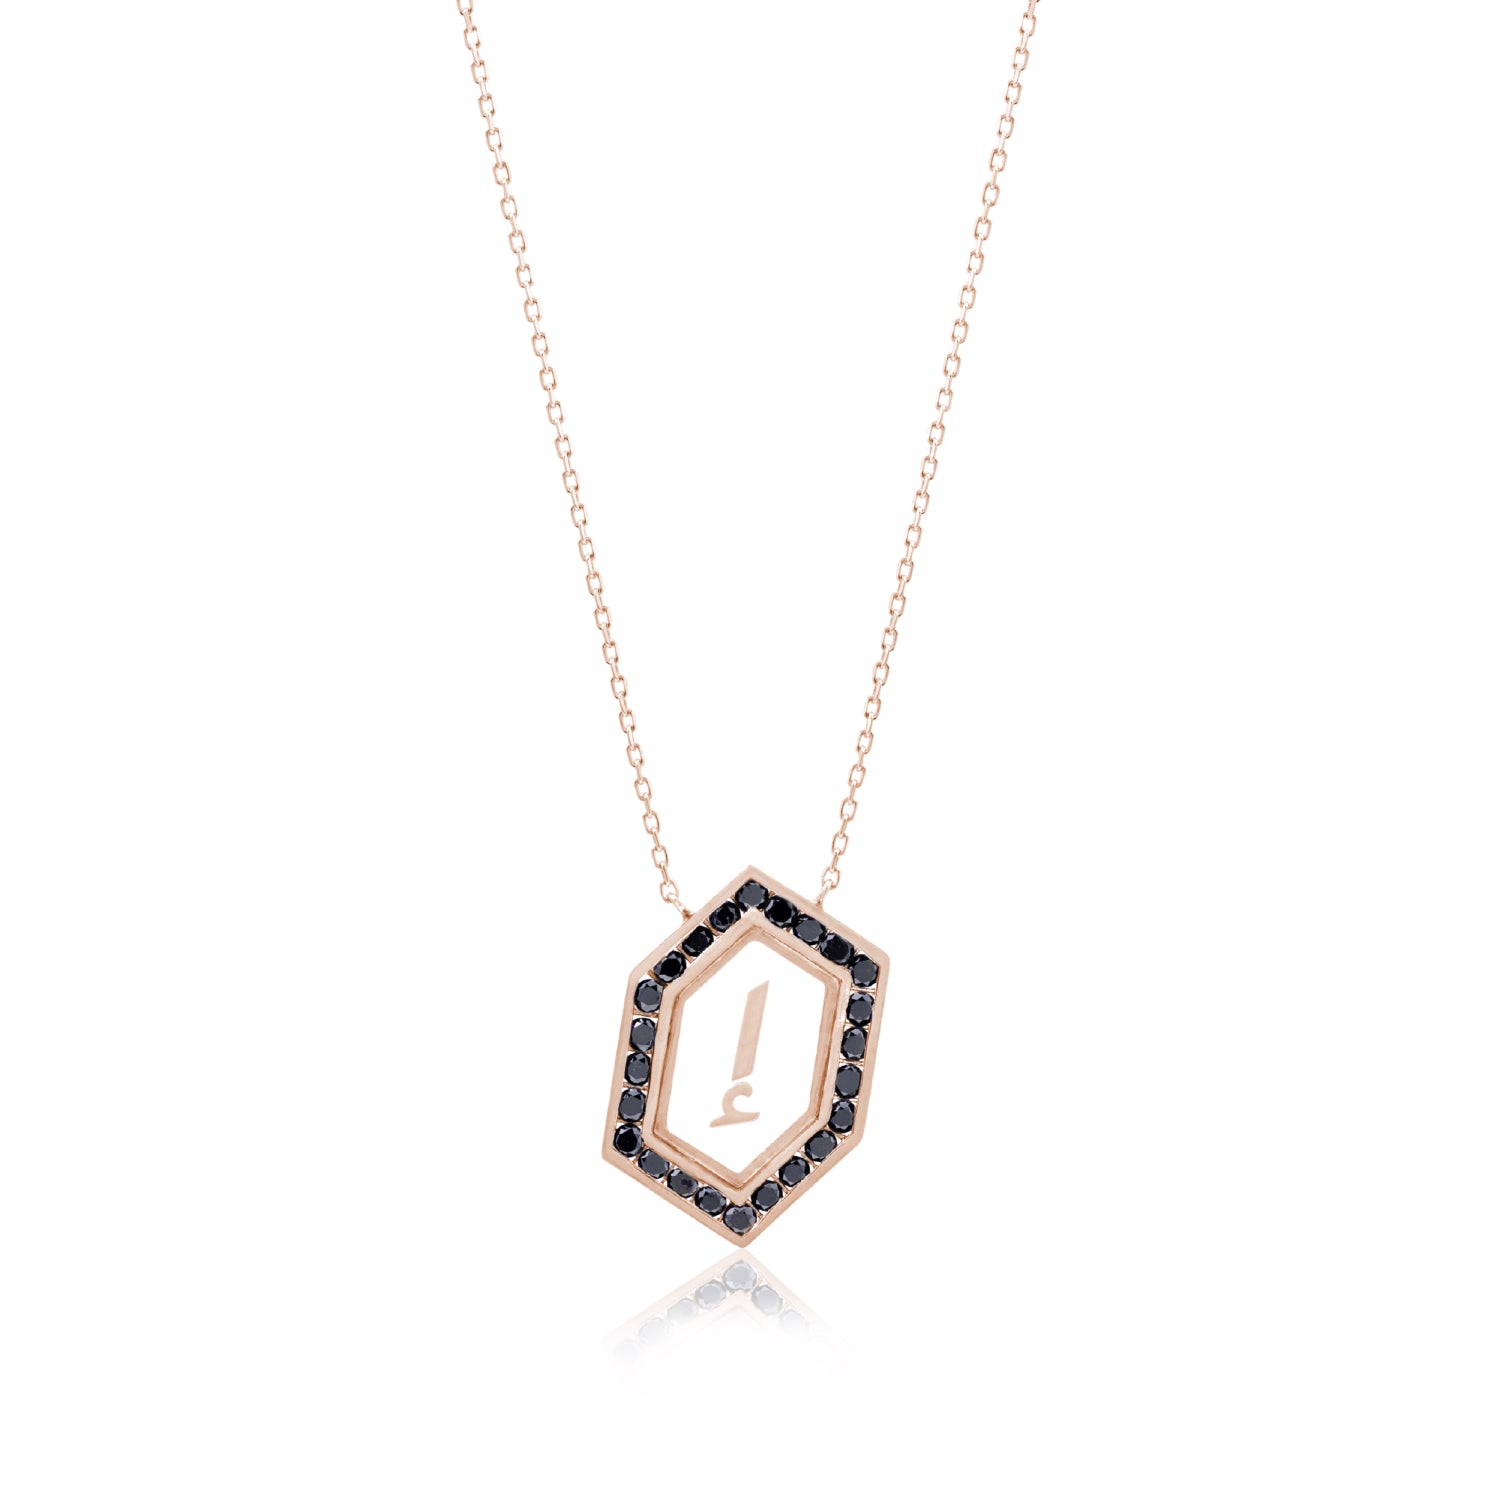 Qamoos 1.0 Letter إ Black Diamond Necklace in Rose Gold